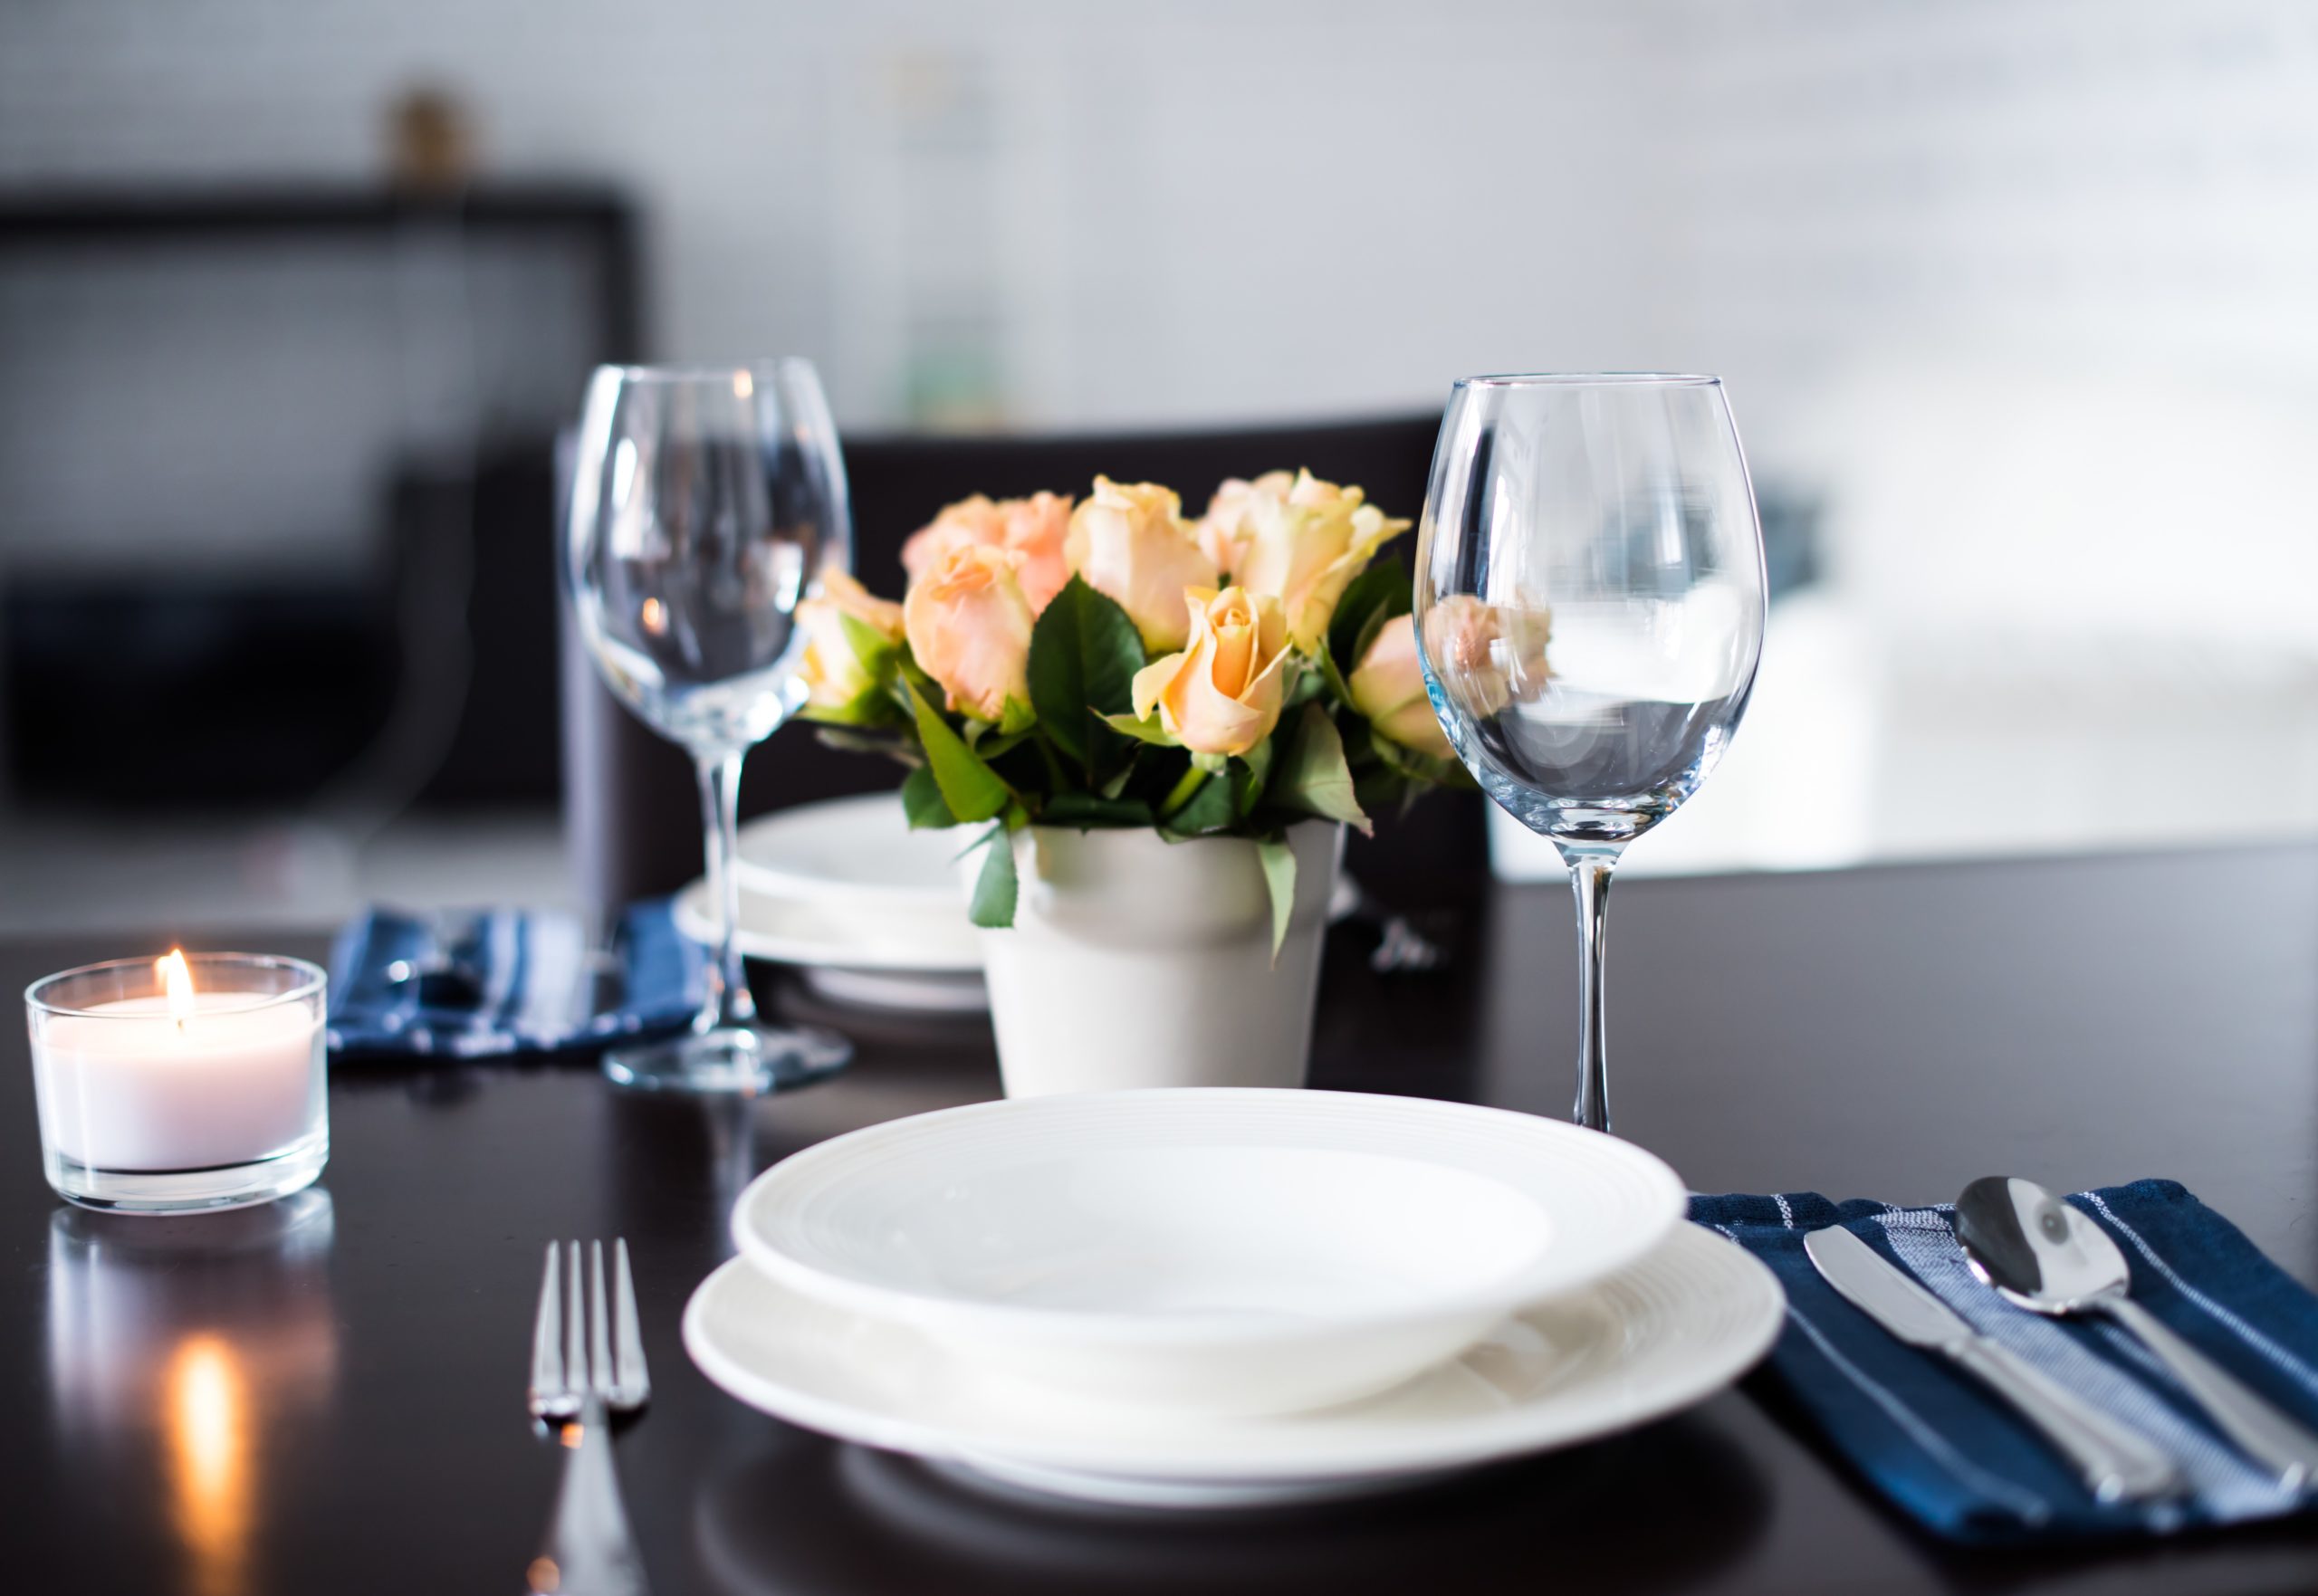 A set dinner table with two wine glasses and yellow roses